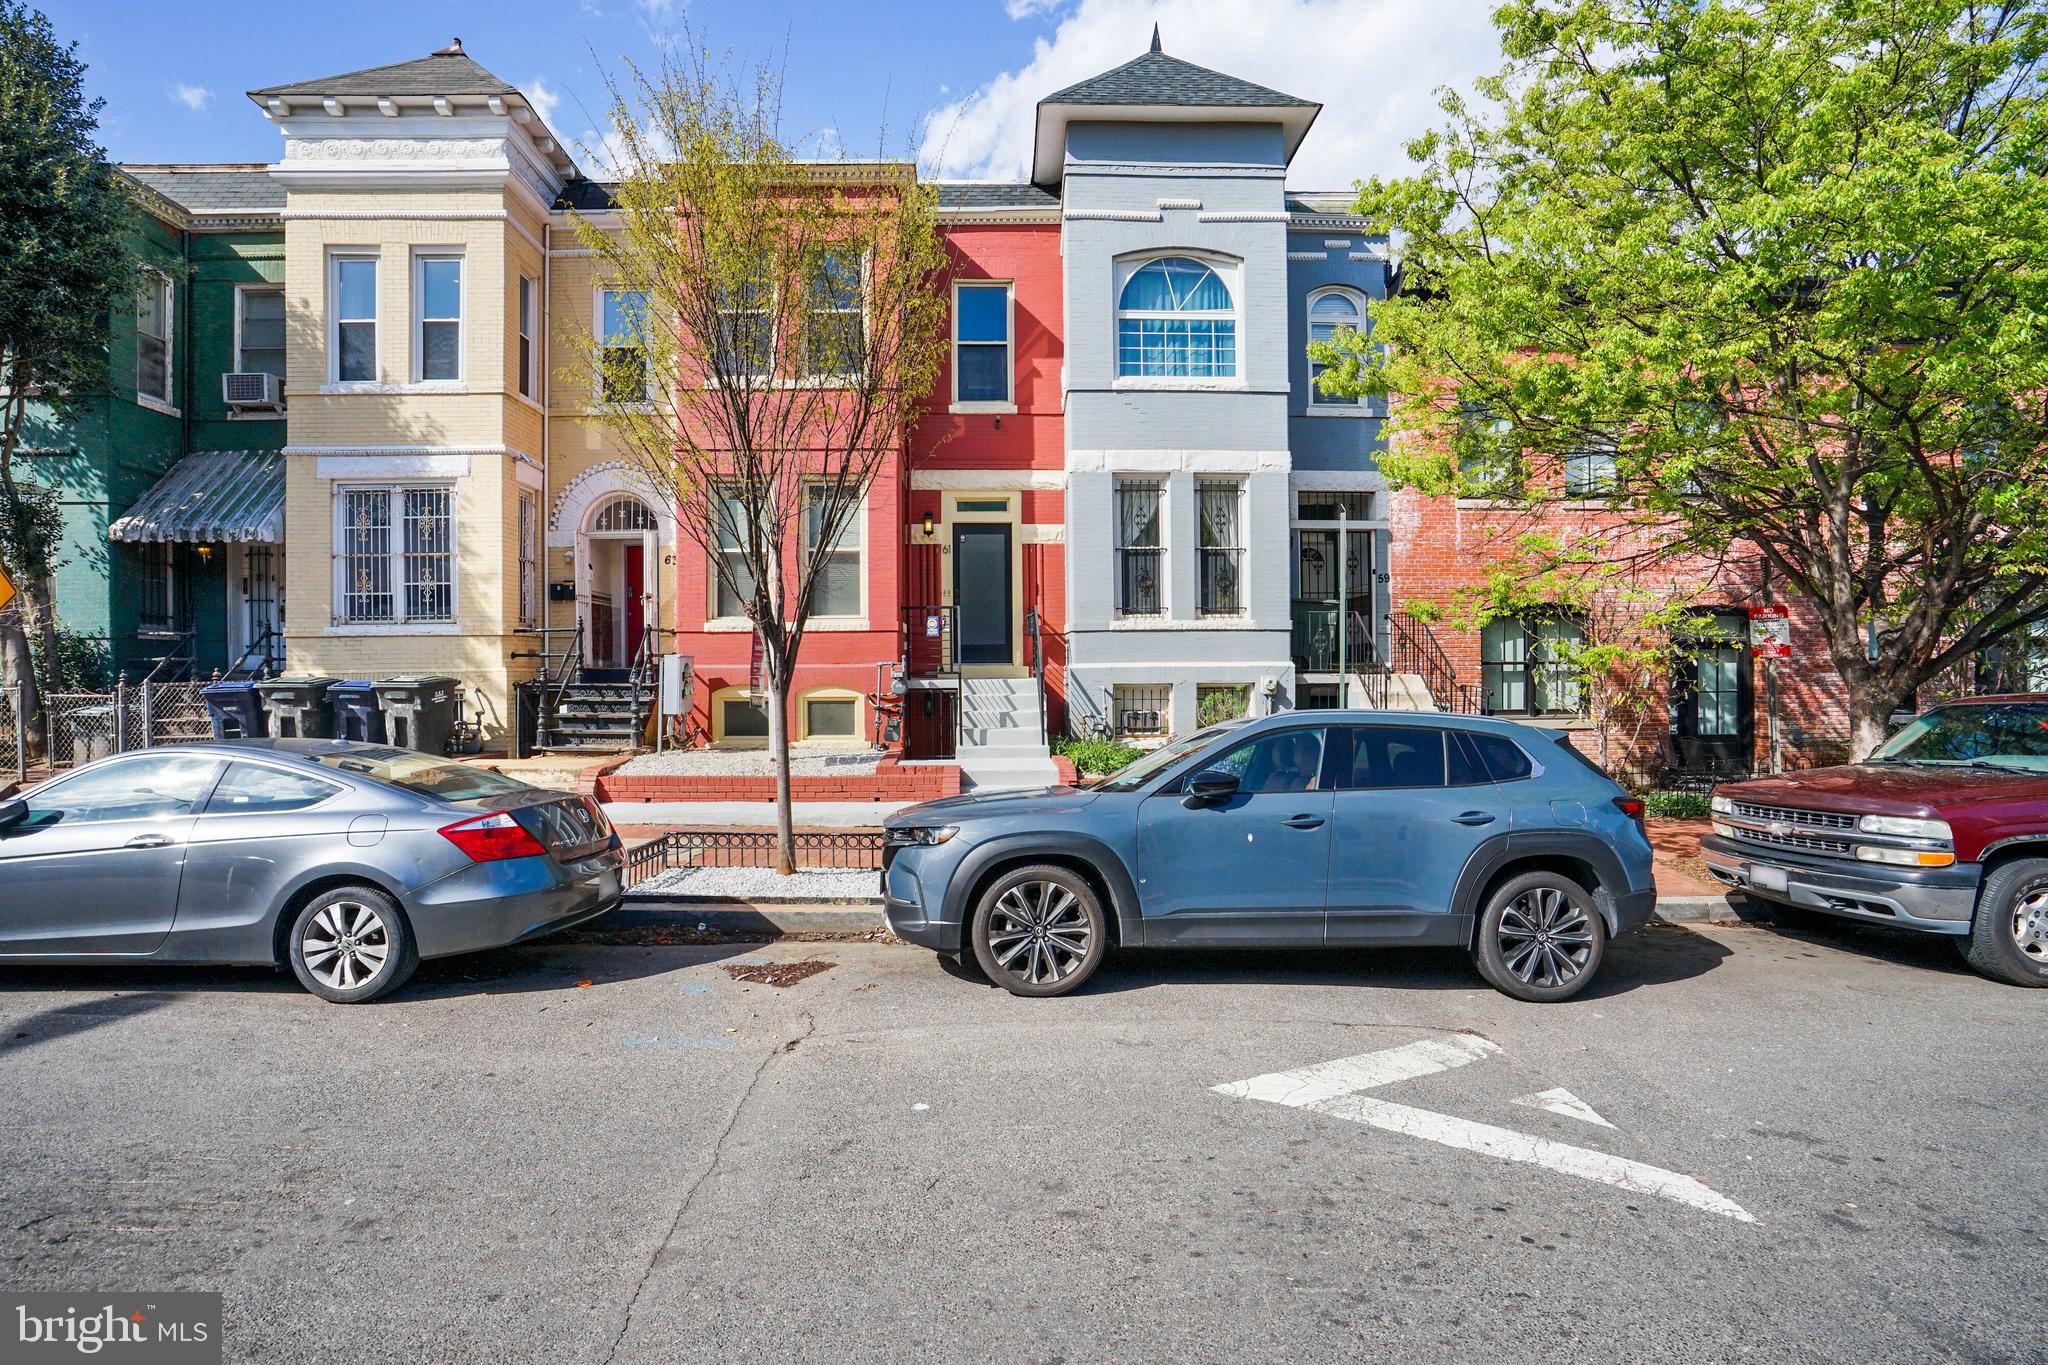 a cars parked in front of a house